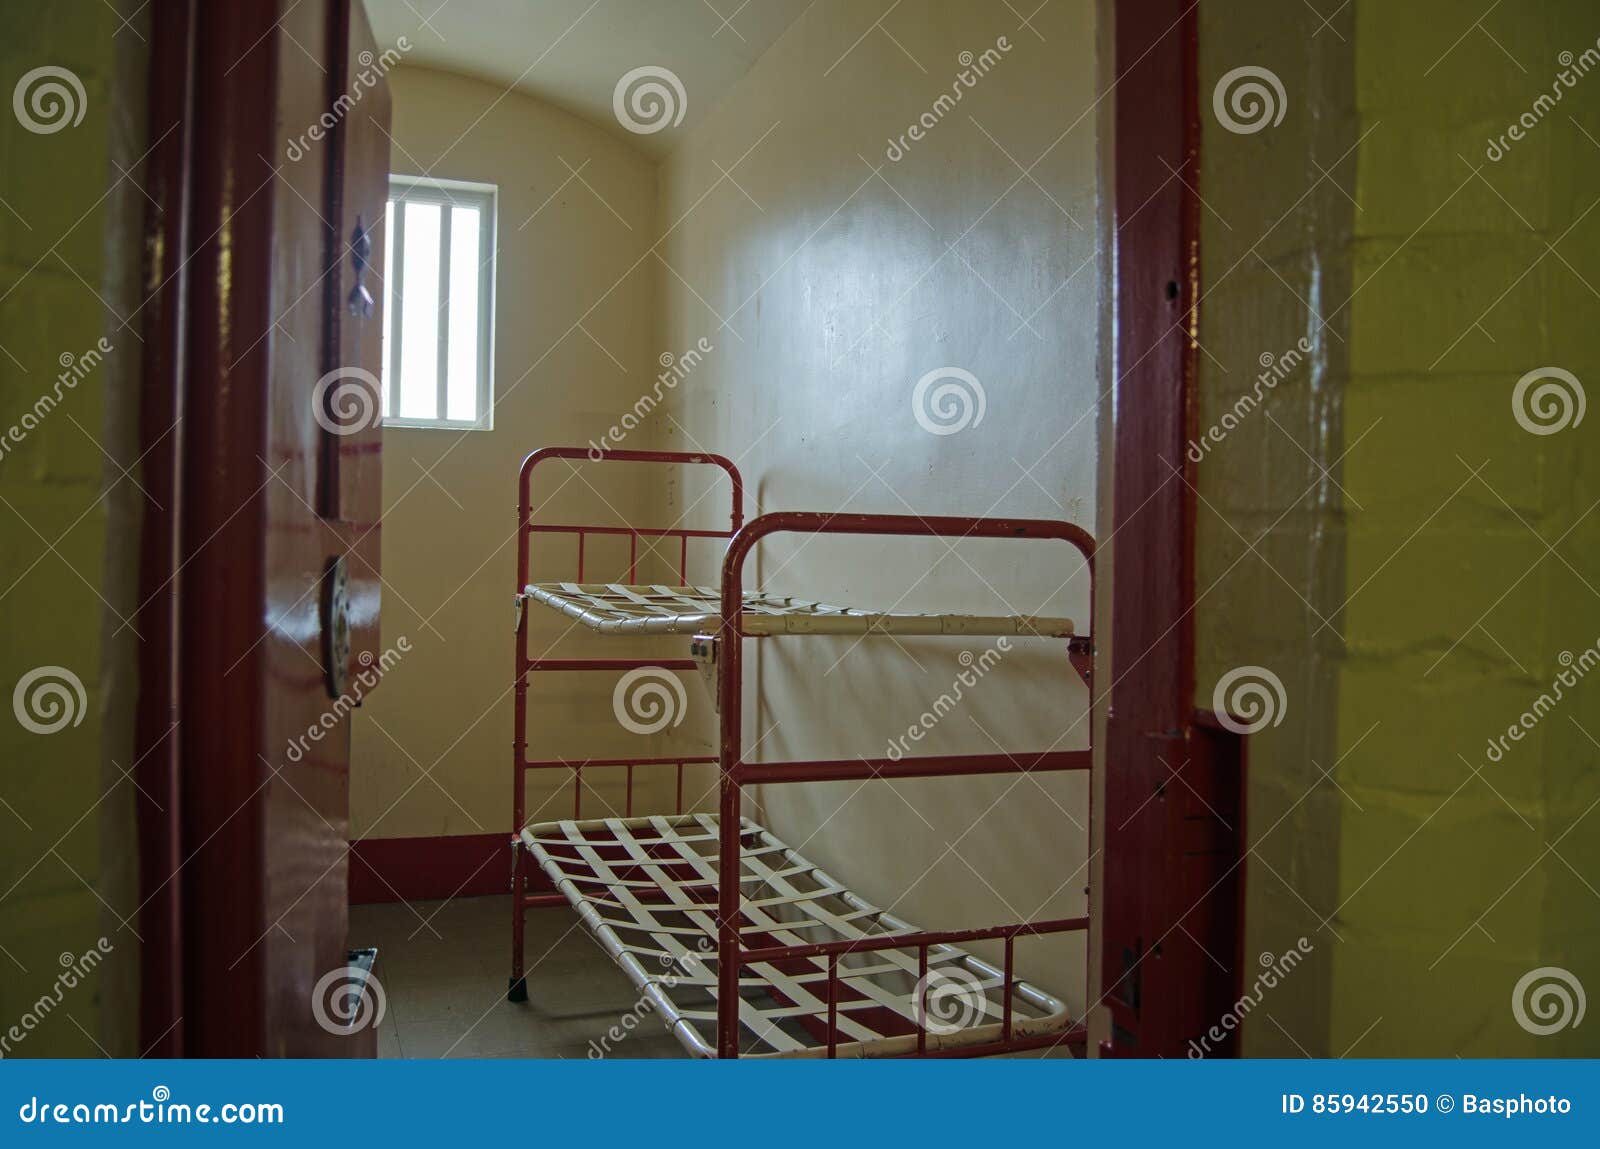 Prison bunk beds stock photo. Image of cell, victorian 85942550